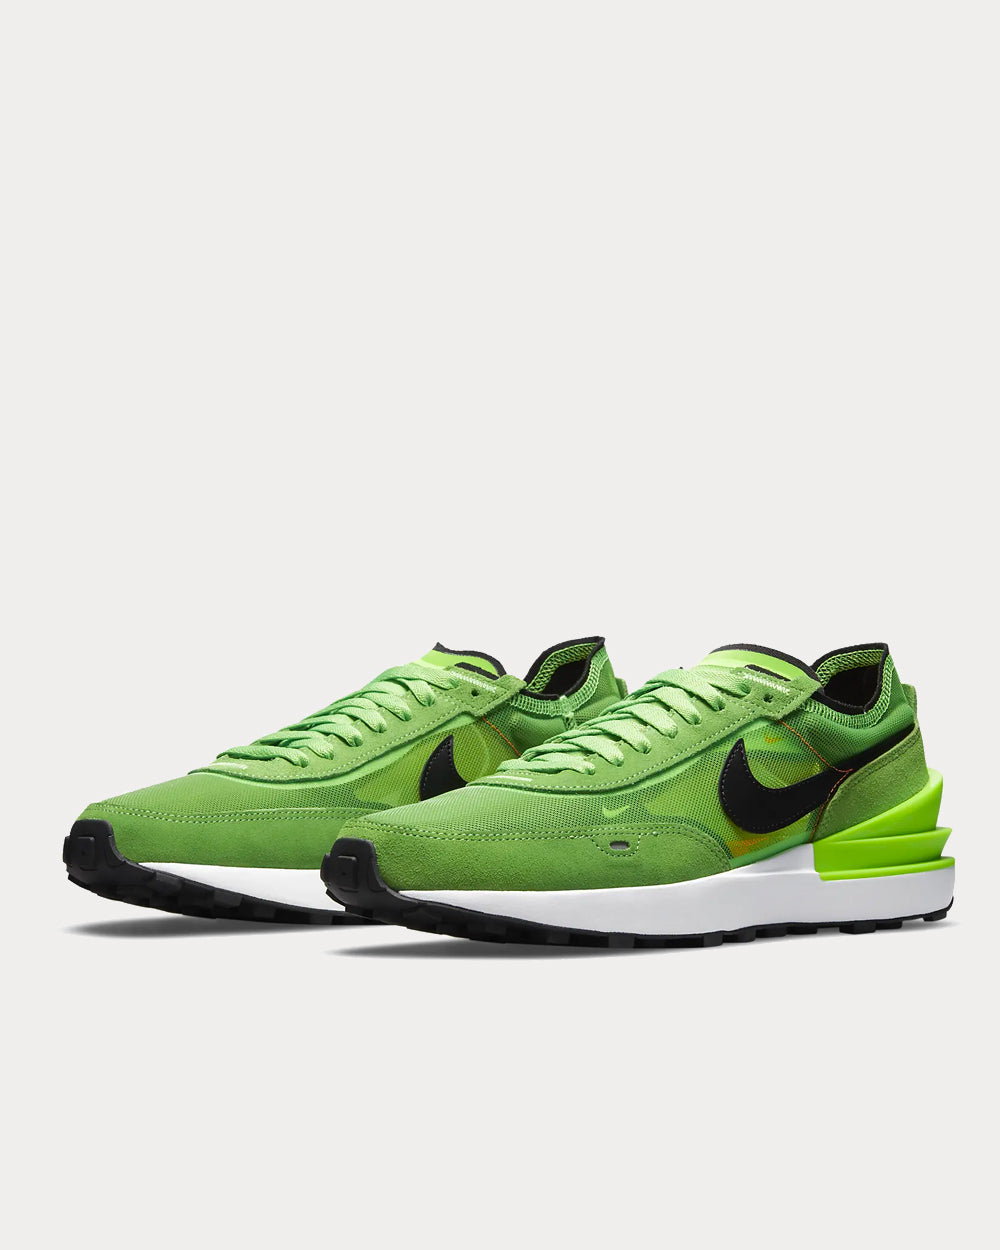 Nike - Waffle One Electric Green / Mean Green / Hyper Crimson / Black Low Top Sneakers